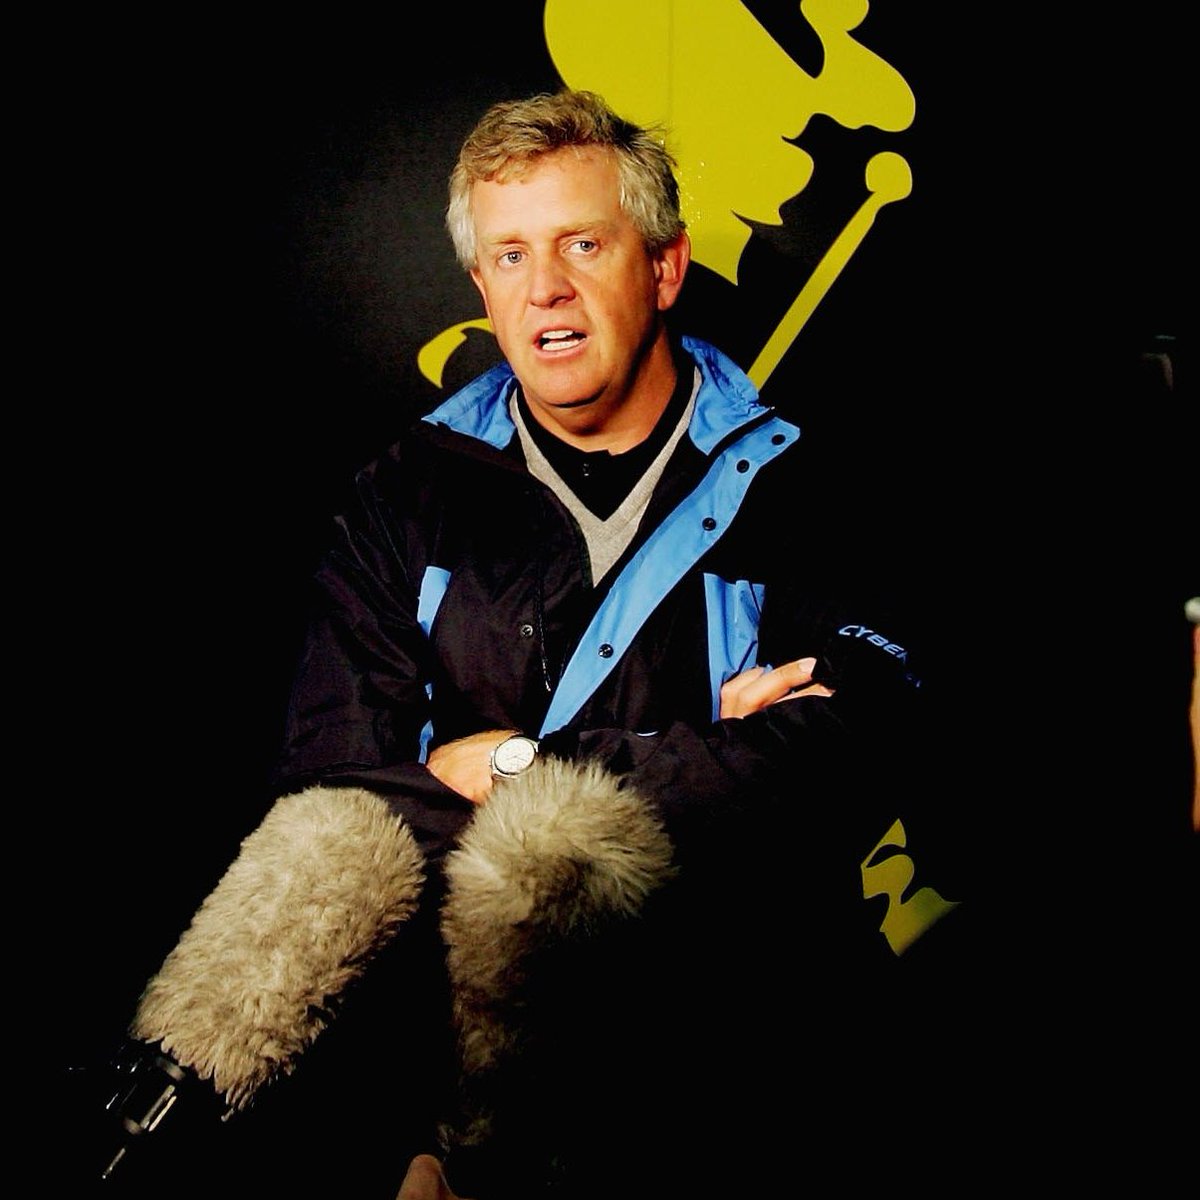 With #DesertIslandDiscs trending on Twitter, I feel compelled to relive Colin Montgomerie's episode from March 2000 where he says he won a tournament because of a song from the Lion King.

A quite incredible interview 🧵